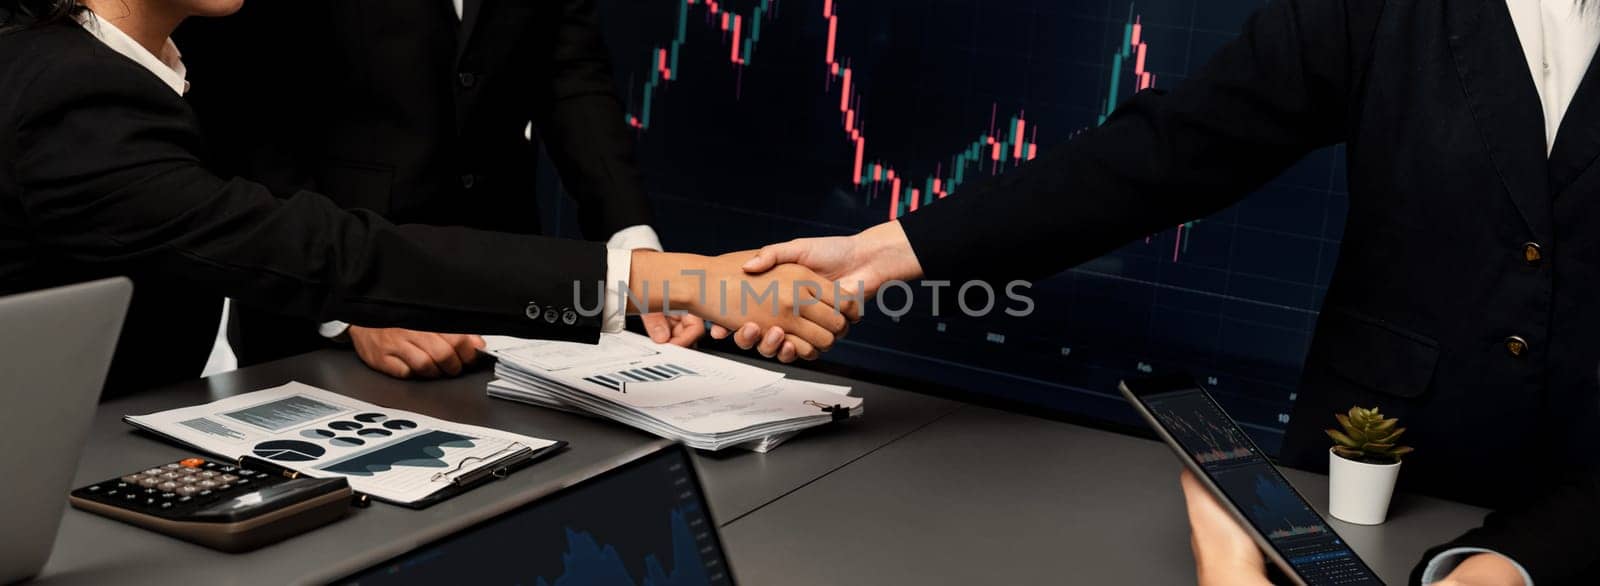 Stock investors celebrate successful profit from selling stock and shaking hand with each other, market analysis and strategic decision-making led to successful stock trading exchange. Trailblazing